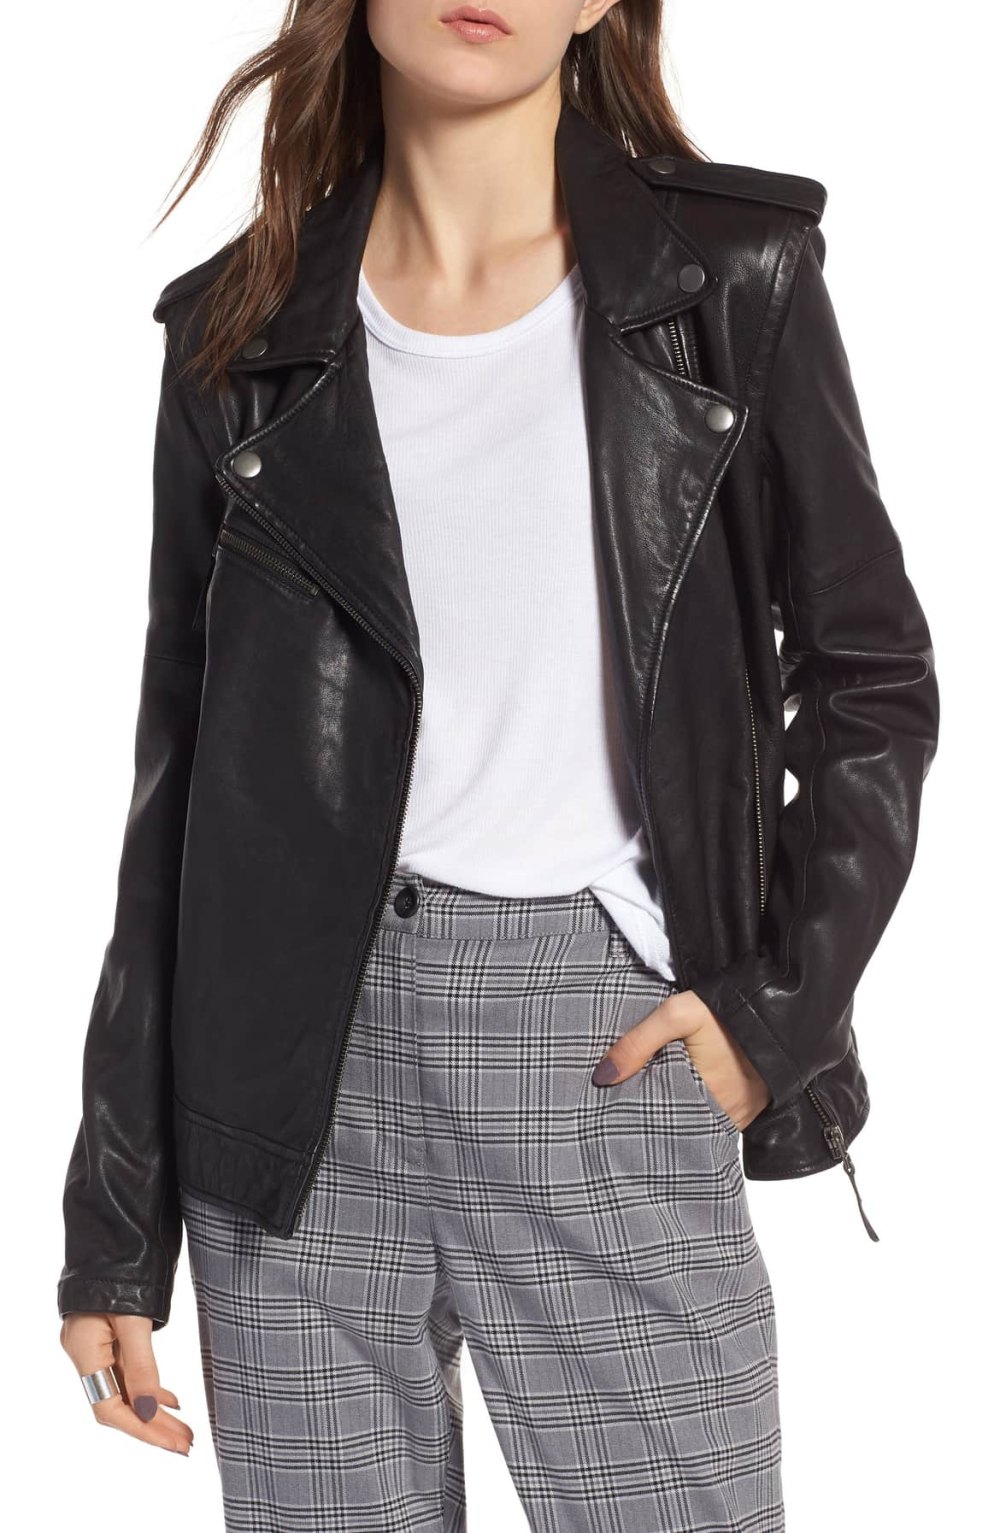 treasure and bond convertible leather jacket